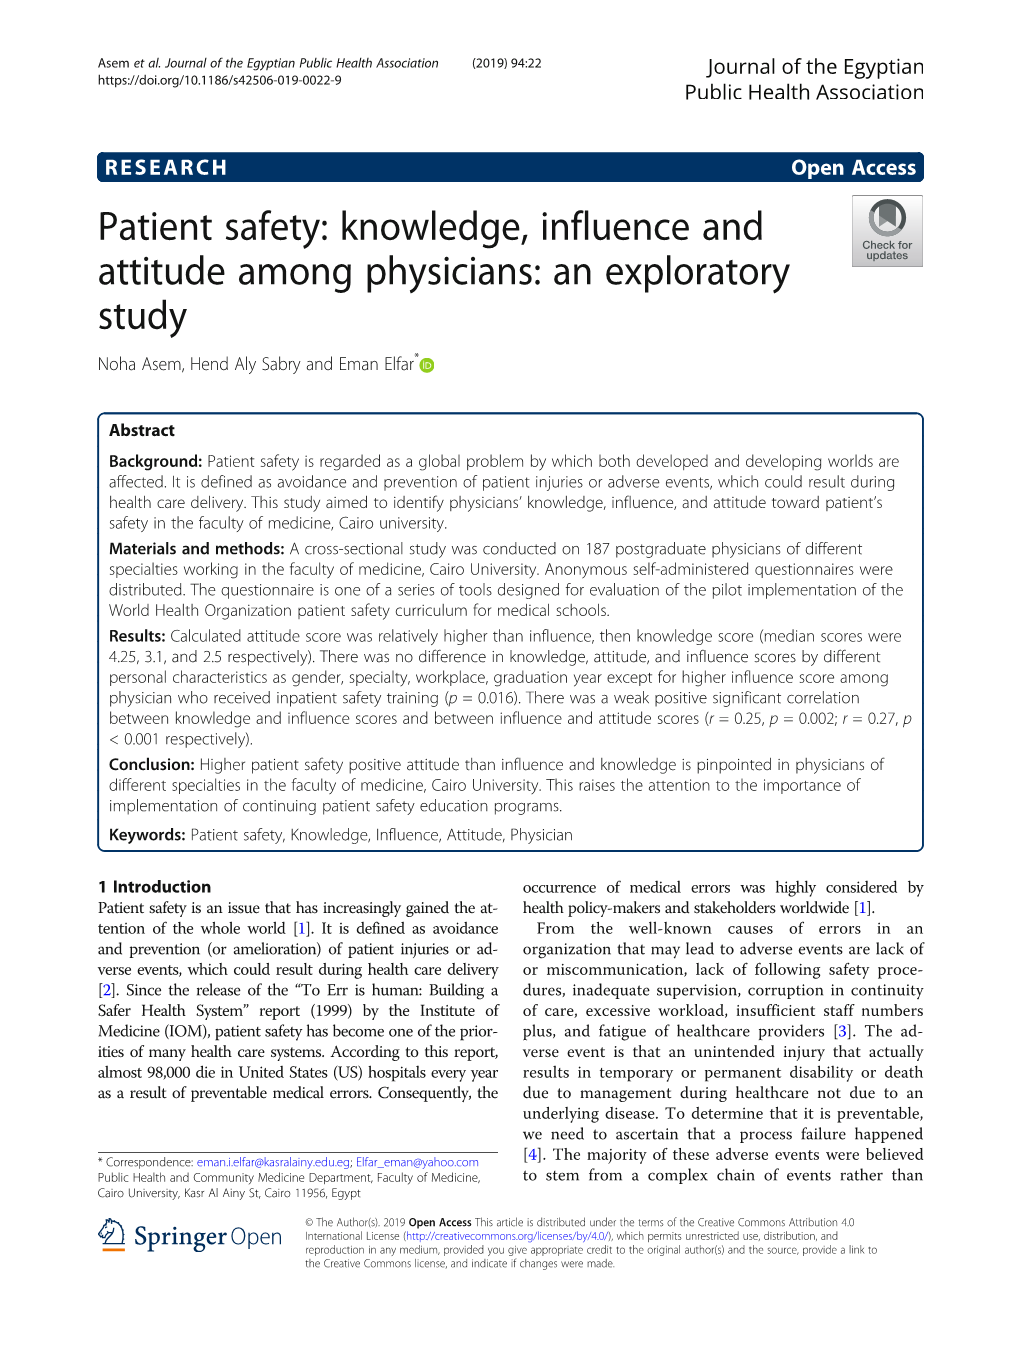 Patient Safety: Knowledge, Influence and Attitude Among Physicians: an Exploratory Study Noha Asem, Hend Aly Sabry and Eman Elfar*